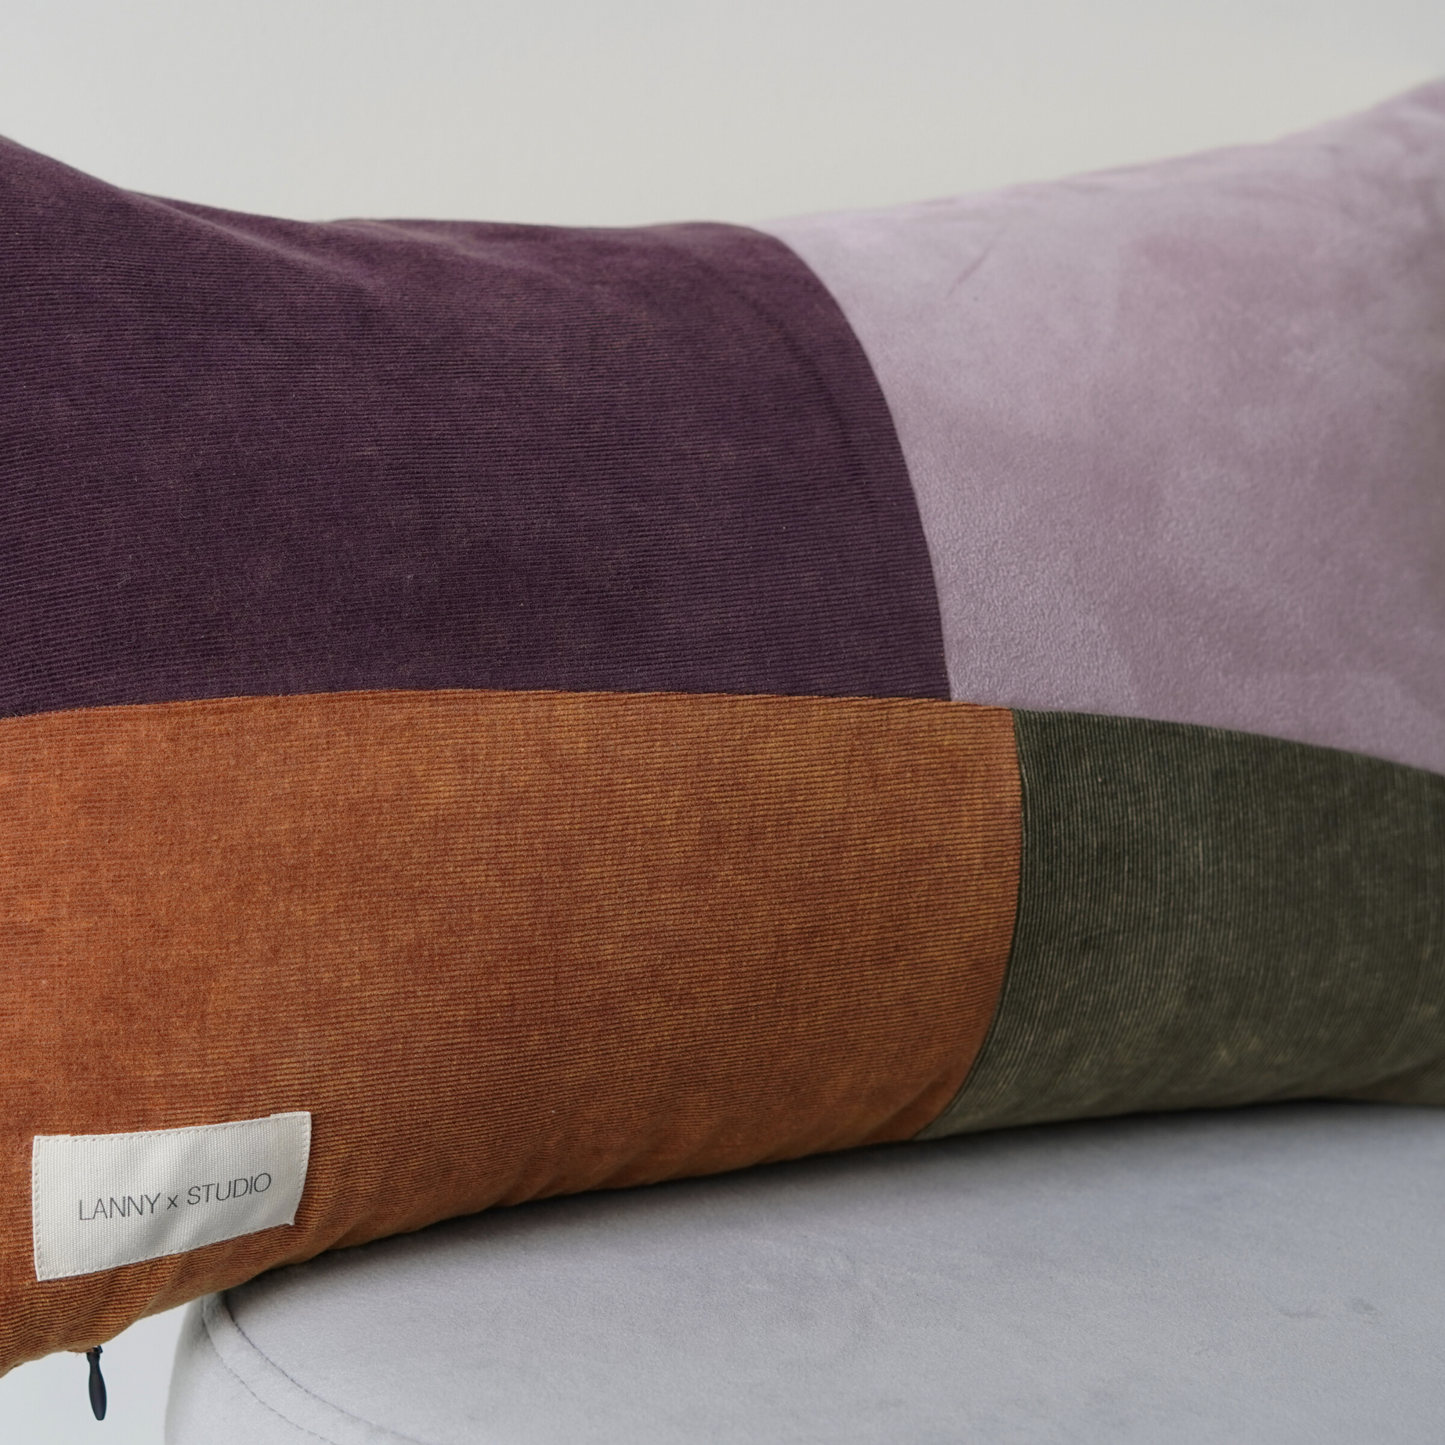 Orange, Purple, Green and Lilac panelled rentable cushion with branded LannyxStudio label. Close up view.